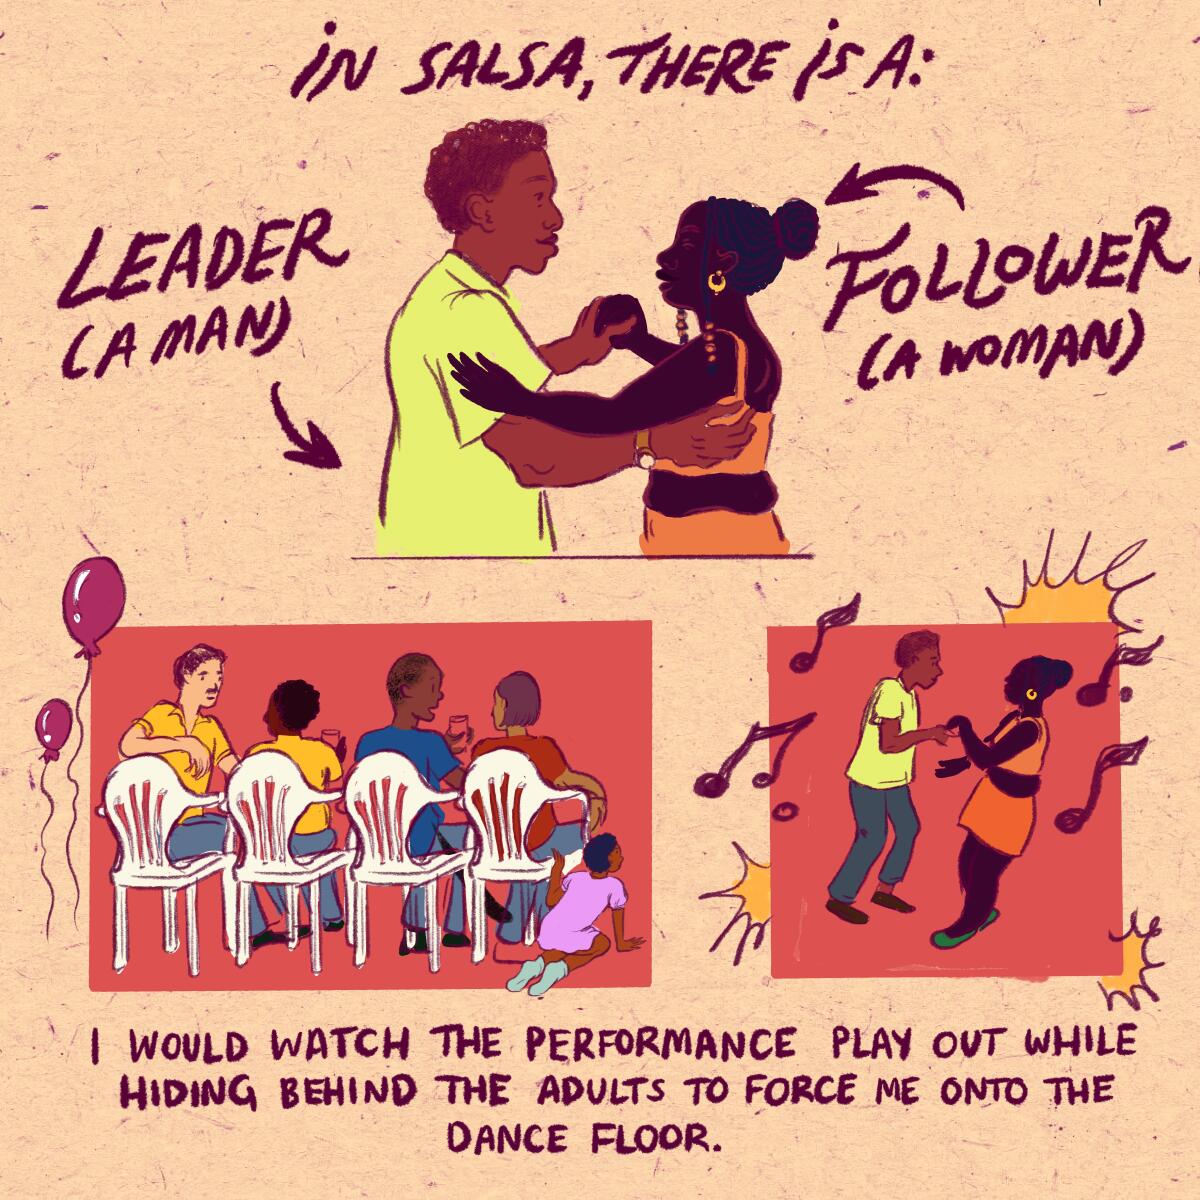 In salsa there is a leader and follower. I would watch performance play out while hiding behind the adults 